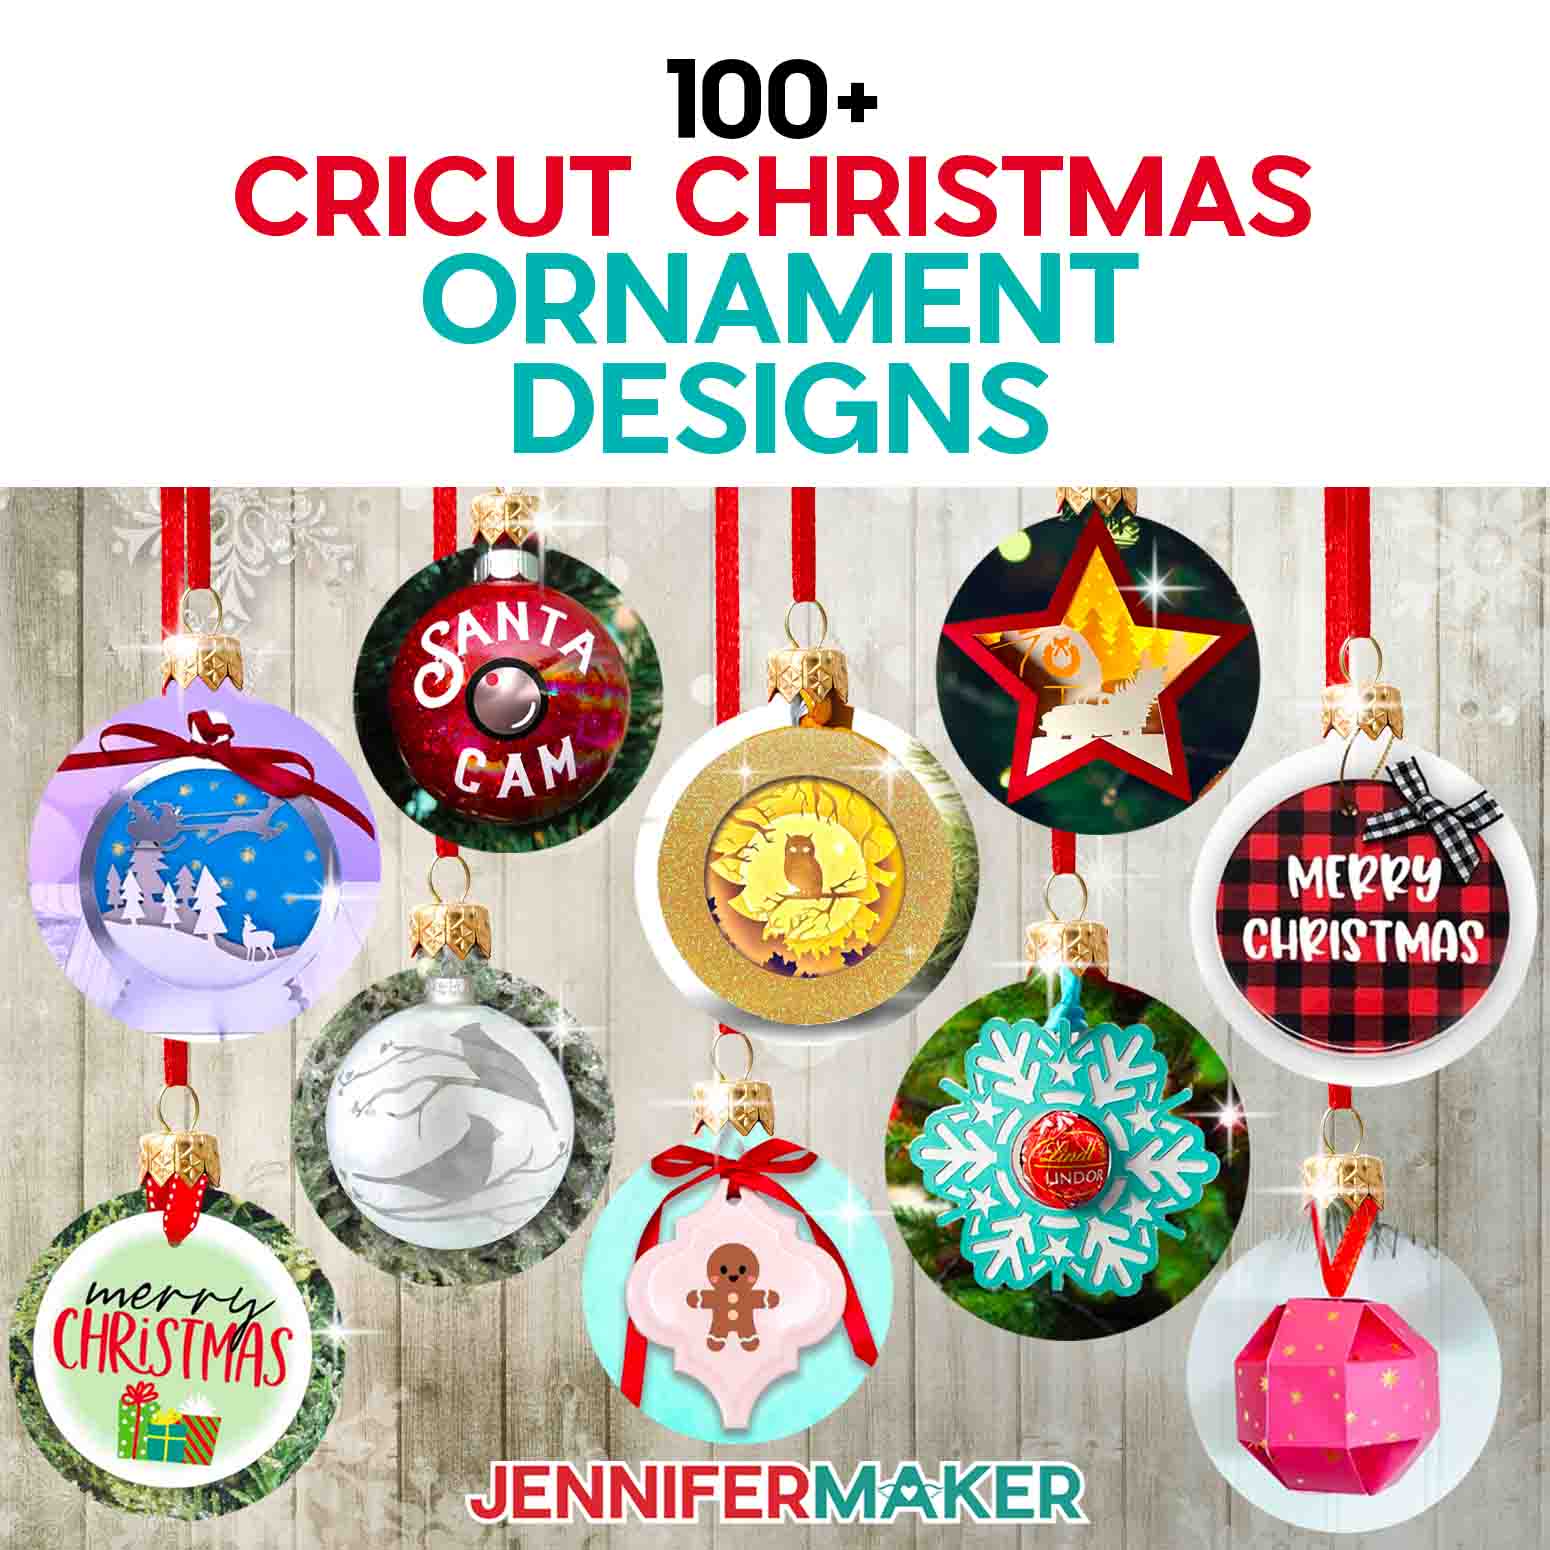 Here are 100+ Cricut Christmas Ornaments you can make with JenniferMaker's tutorials! A collection of ten different Cricut crafted ornaments hang against a light wood background.